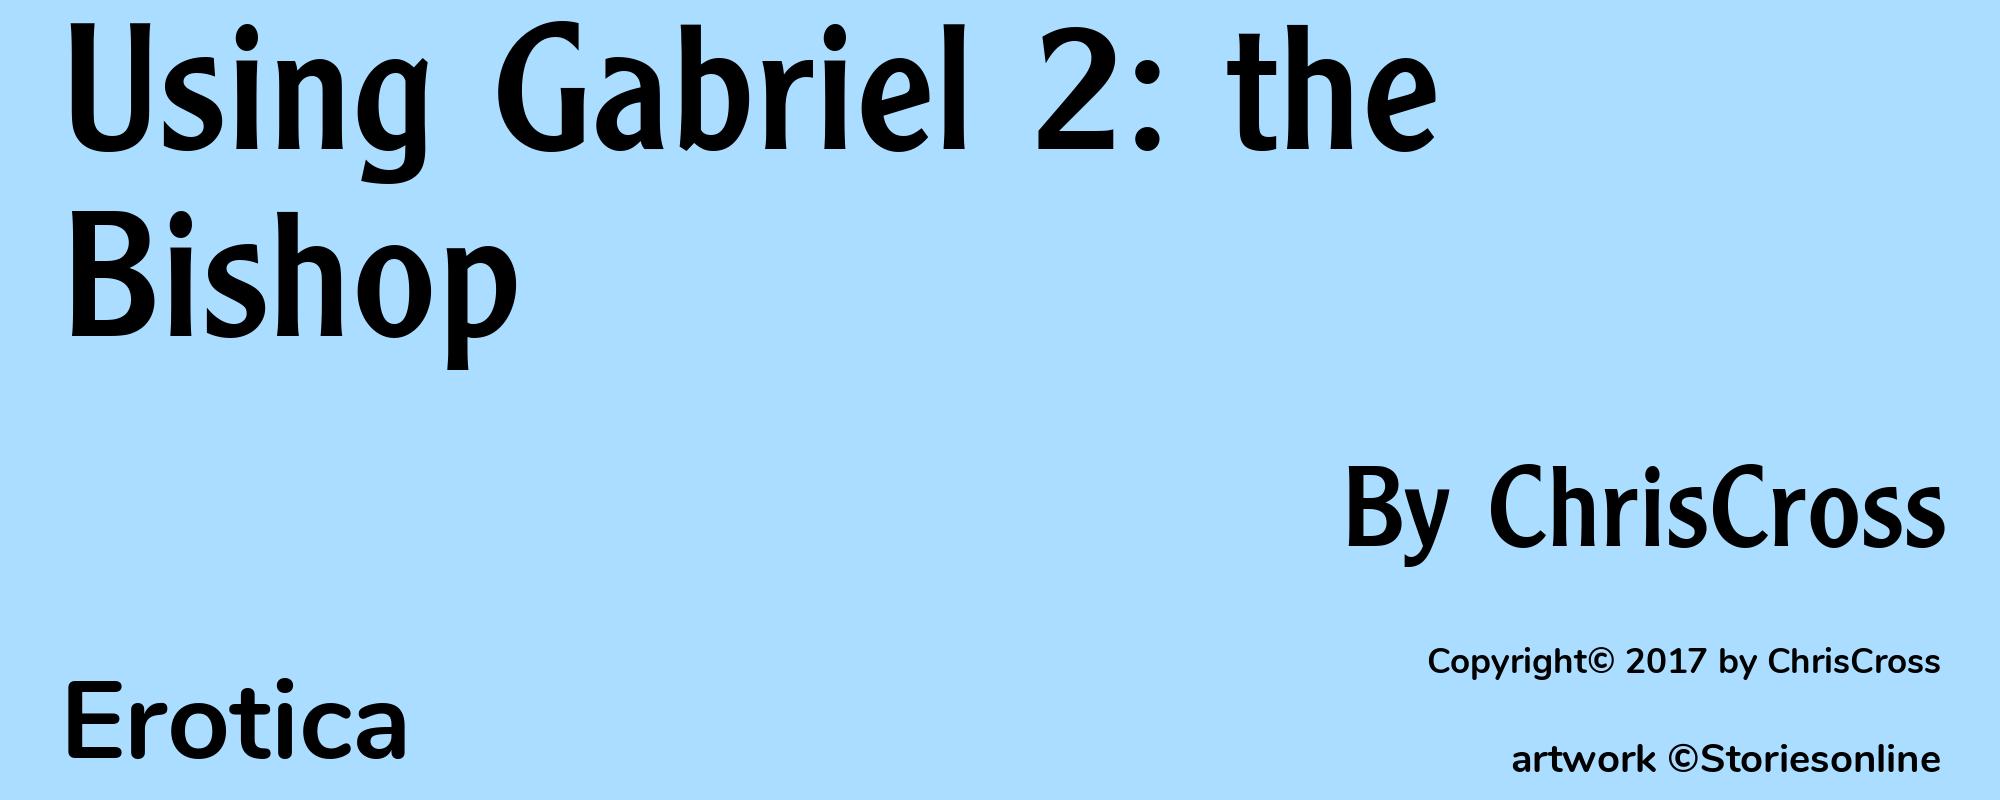 Using Gabriel 2: the Bishop - Cover